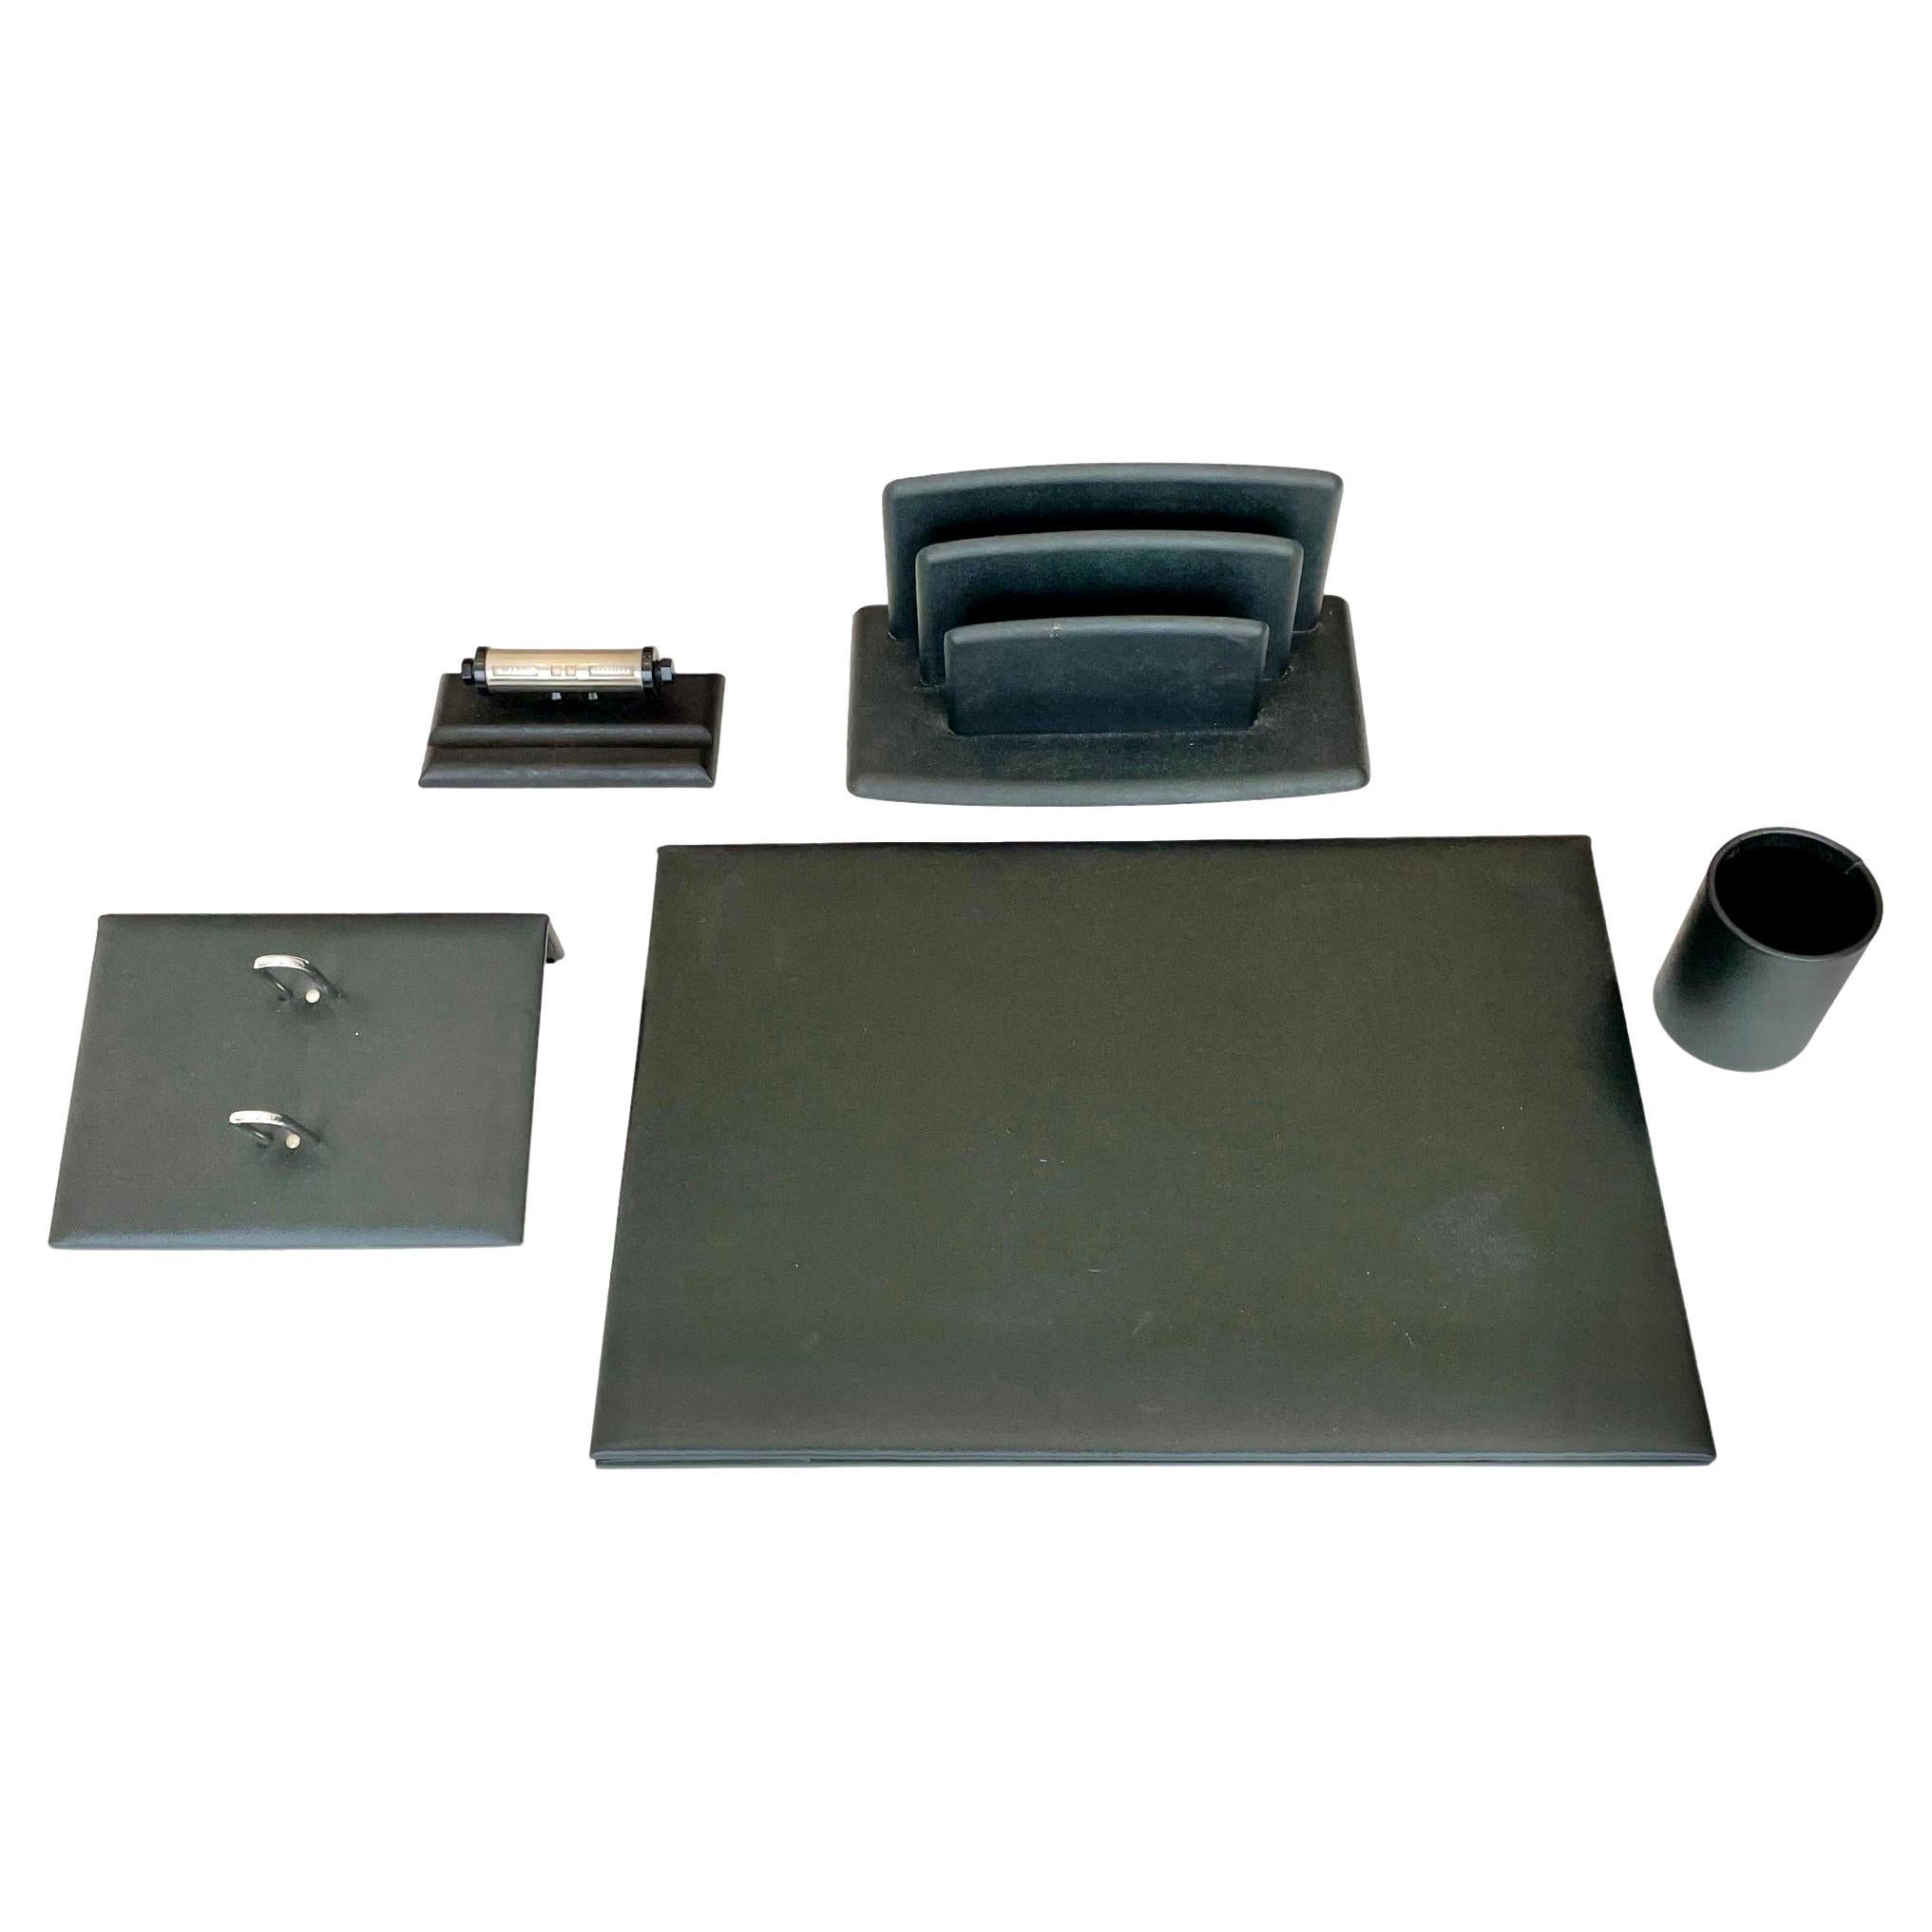 French Leather Desk Set by Le Tanneur